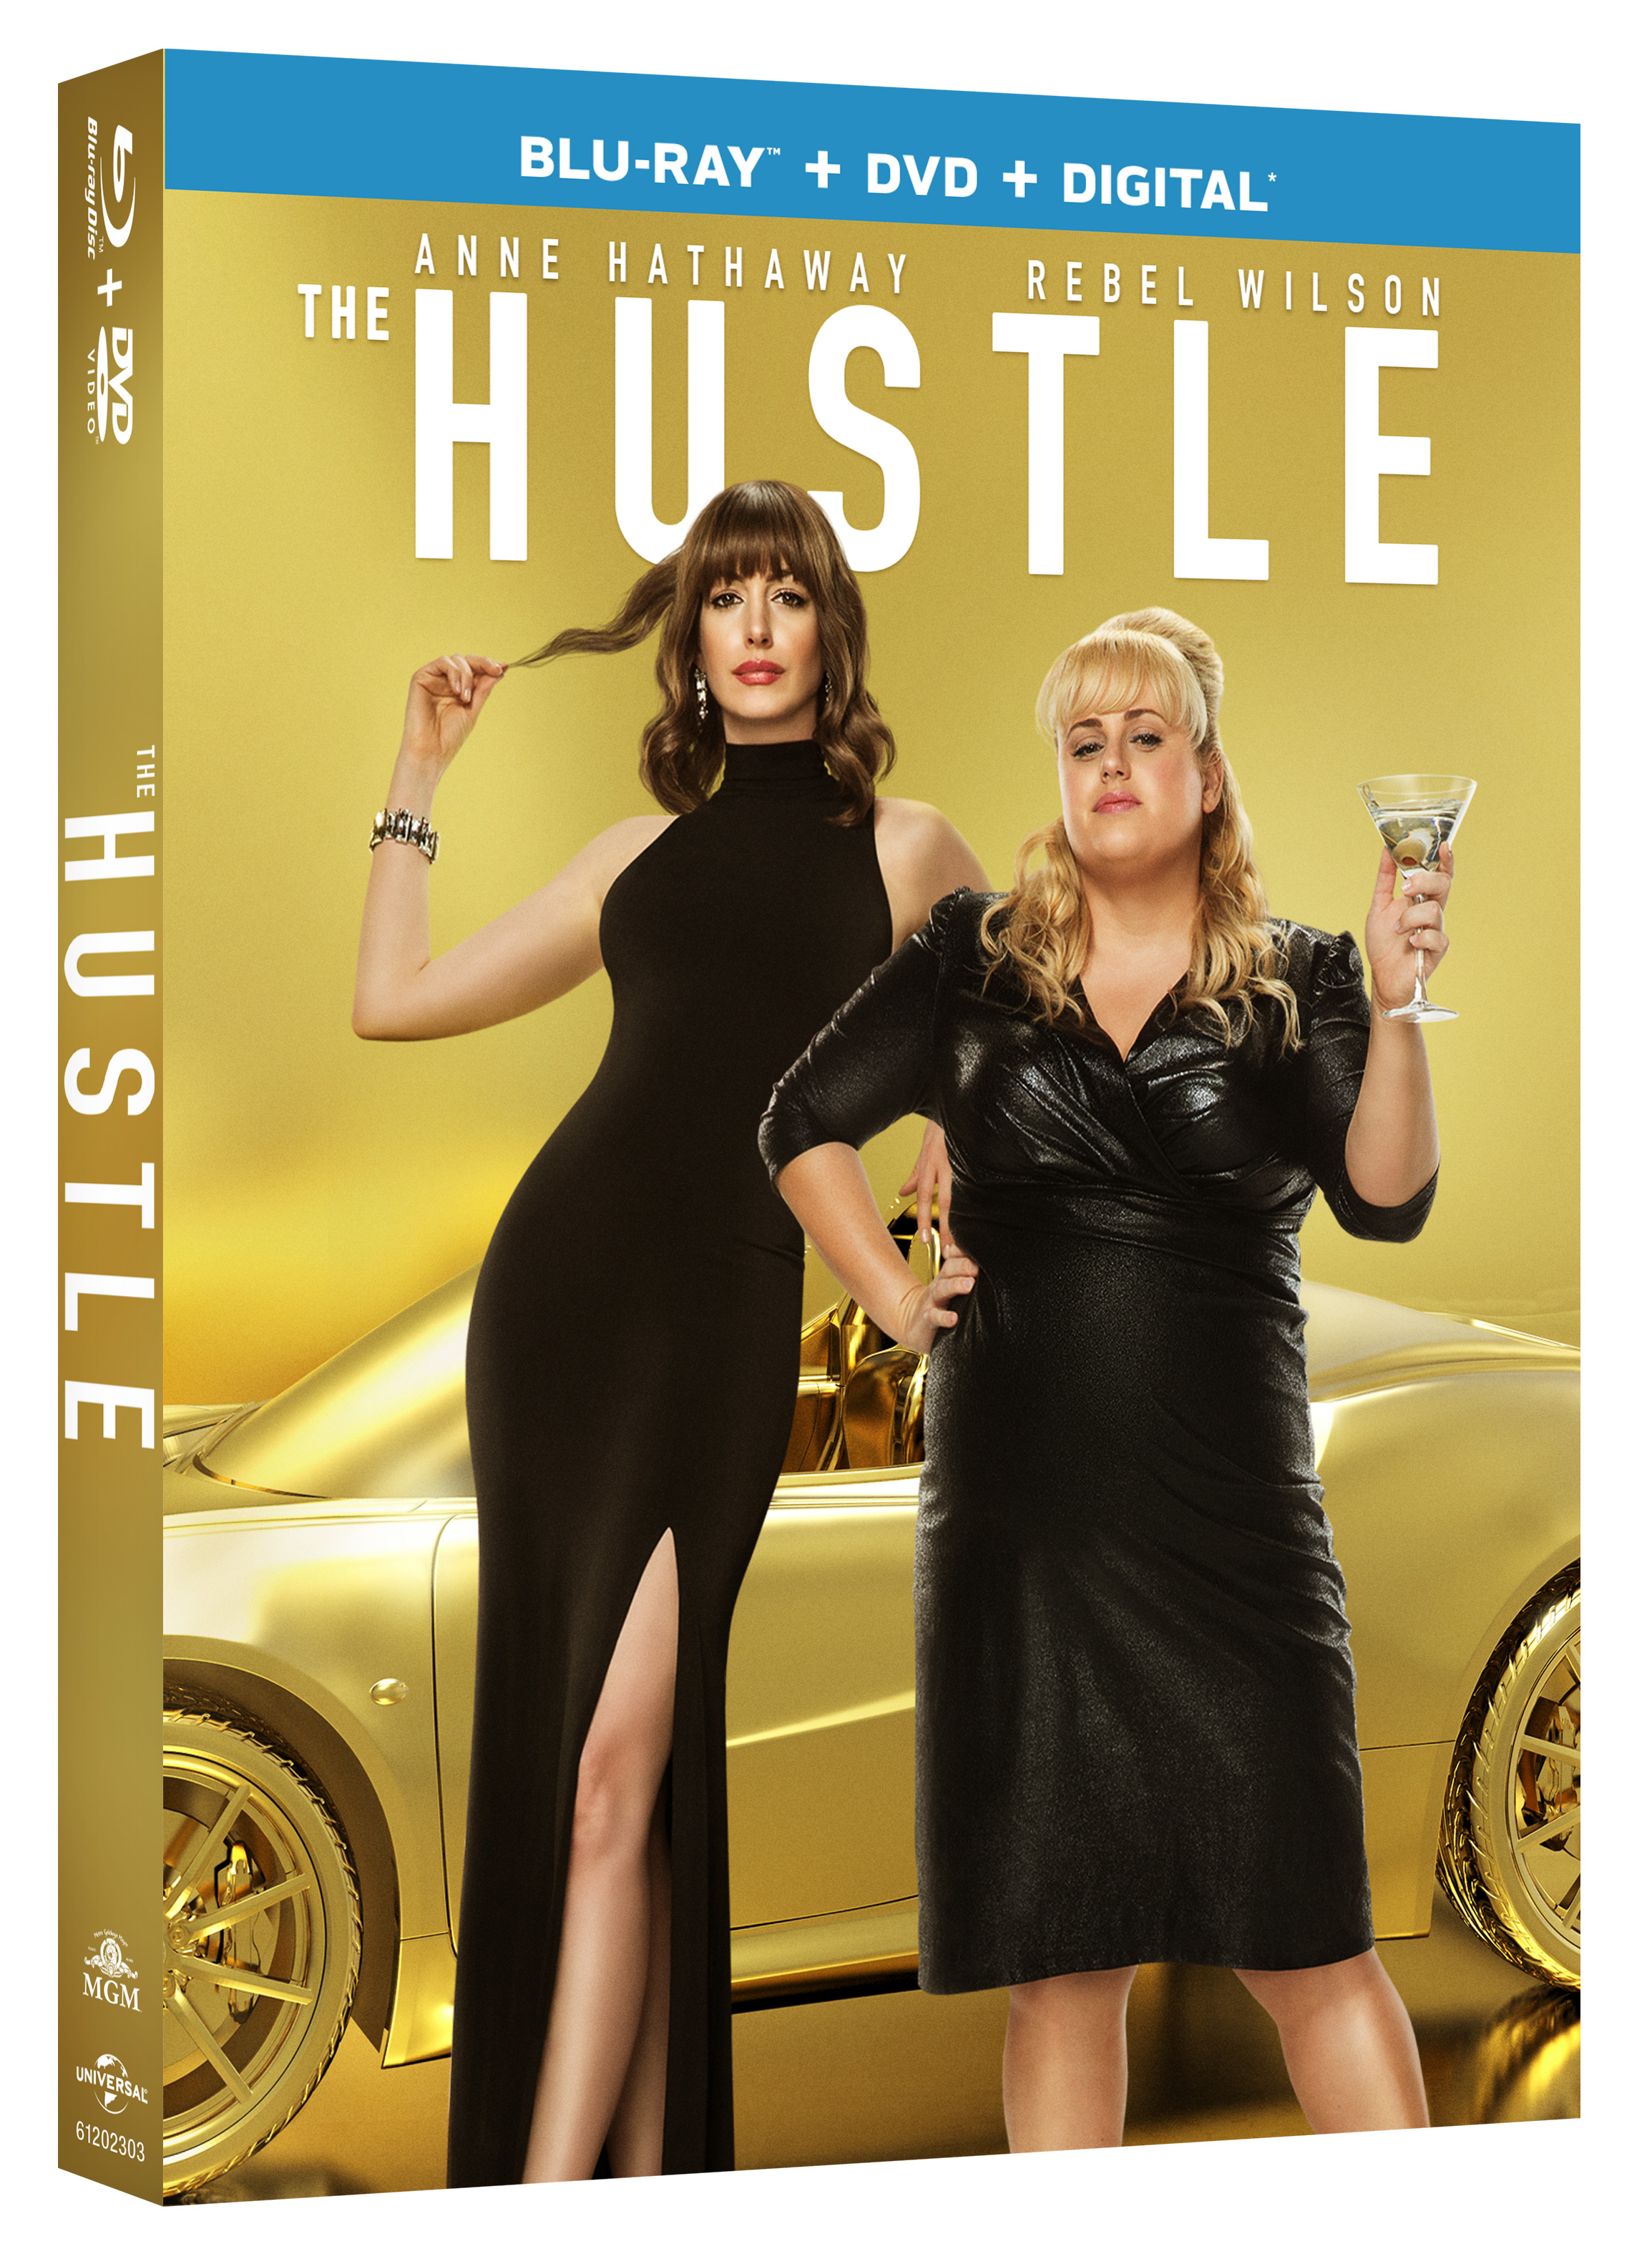 LRM Exclusive: The Hustle Blu Ray Combo Pack Giveaway